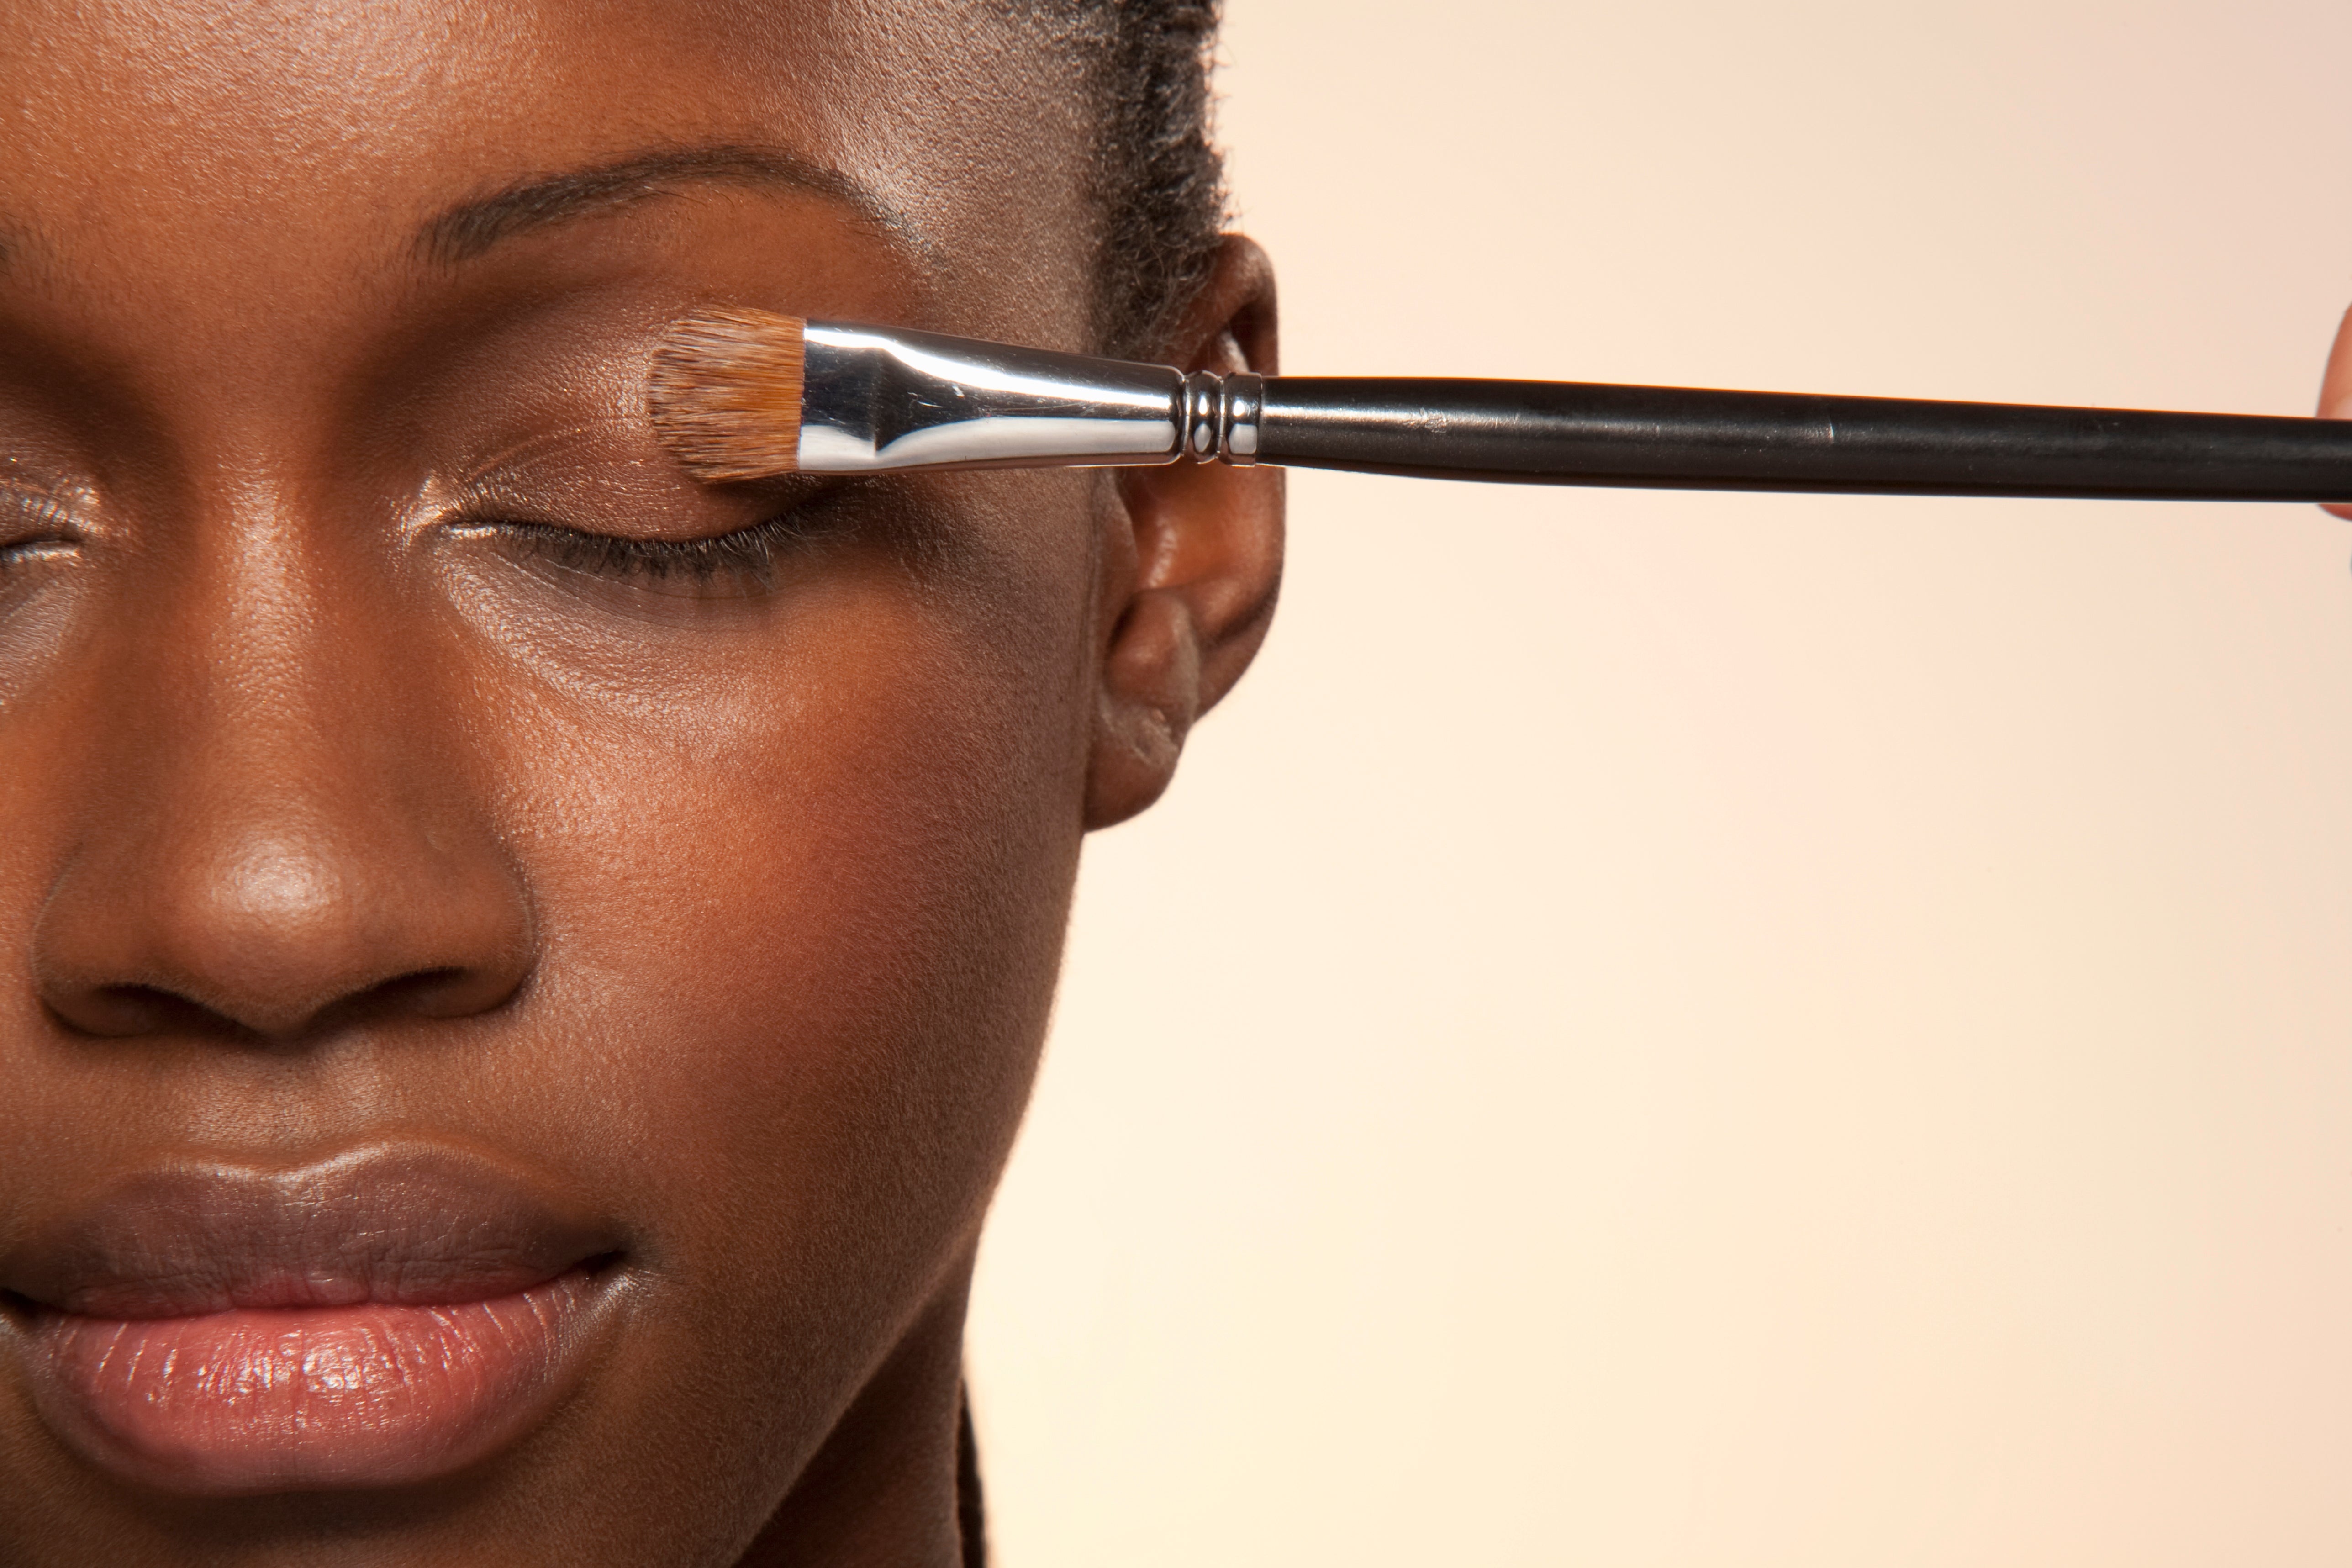 7 Things To Remember If You're An Aspiring Makeup Artist
